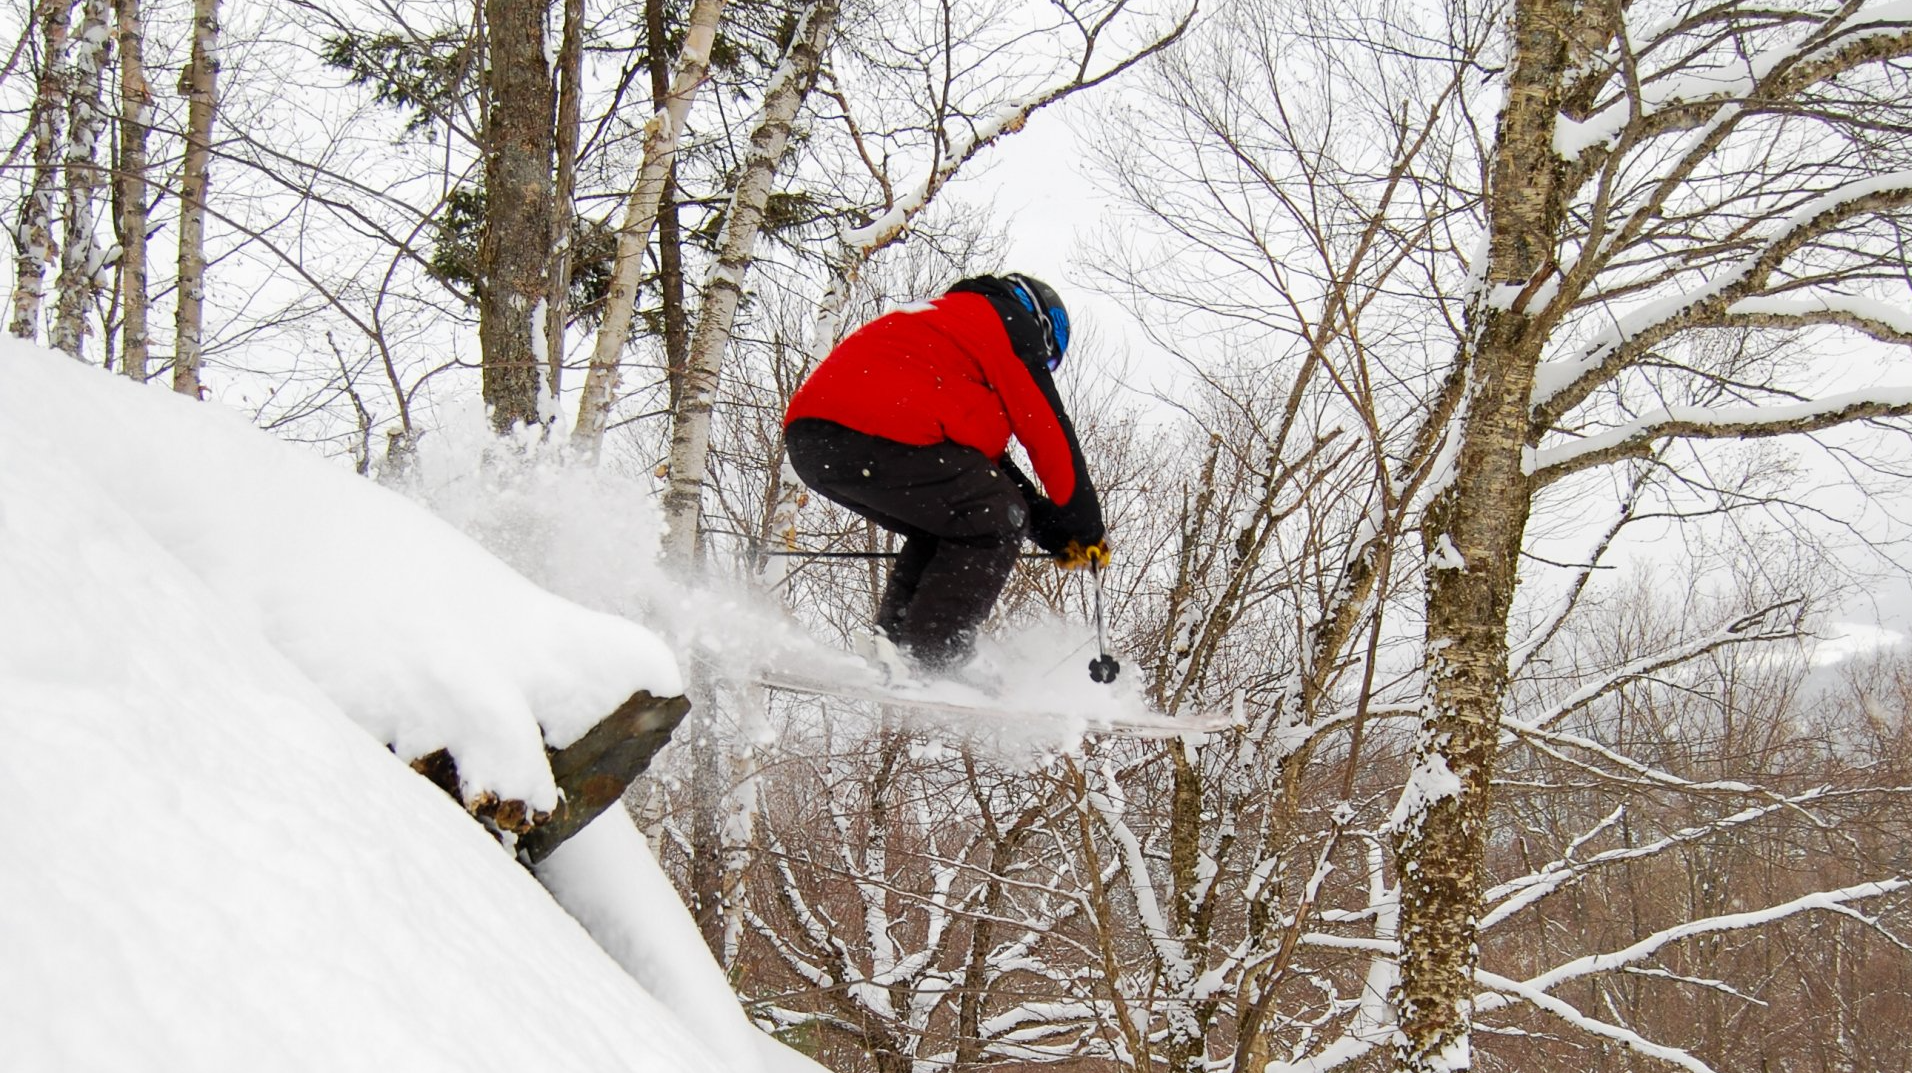 A man freestyle skiing in Burke, Vermont